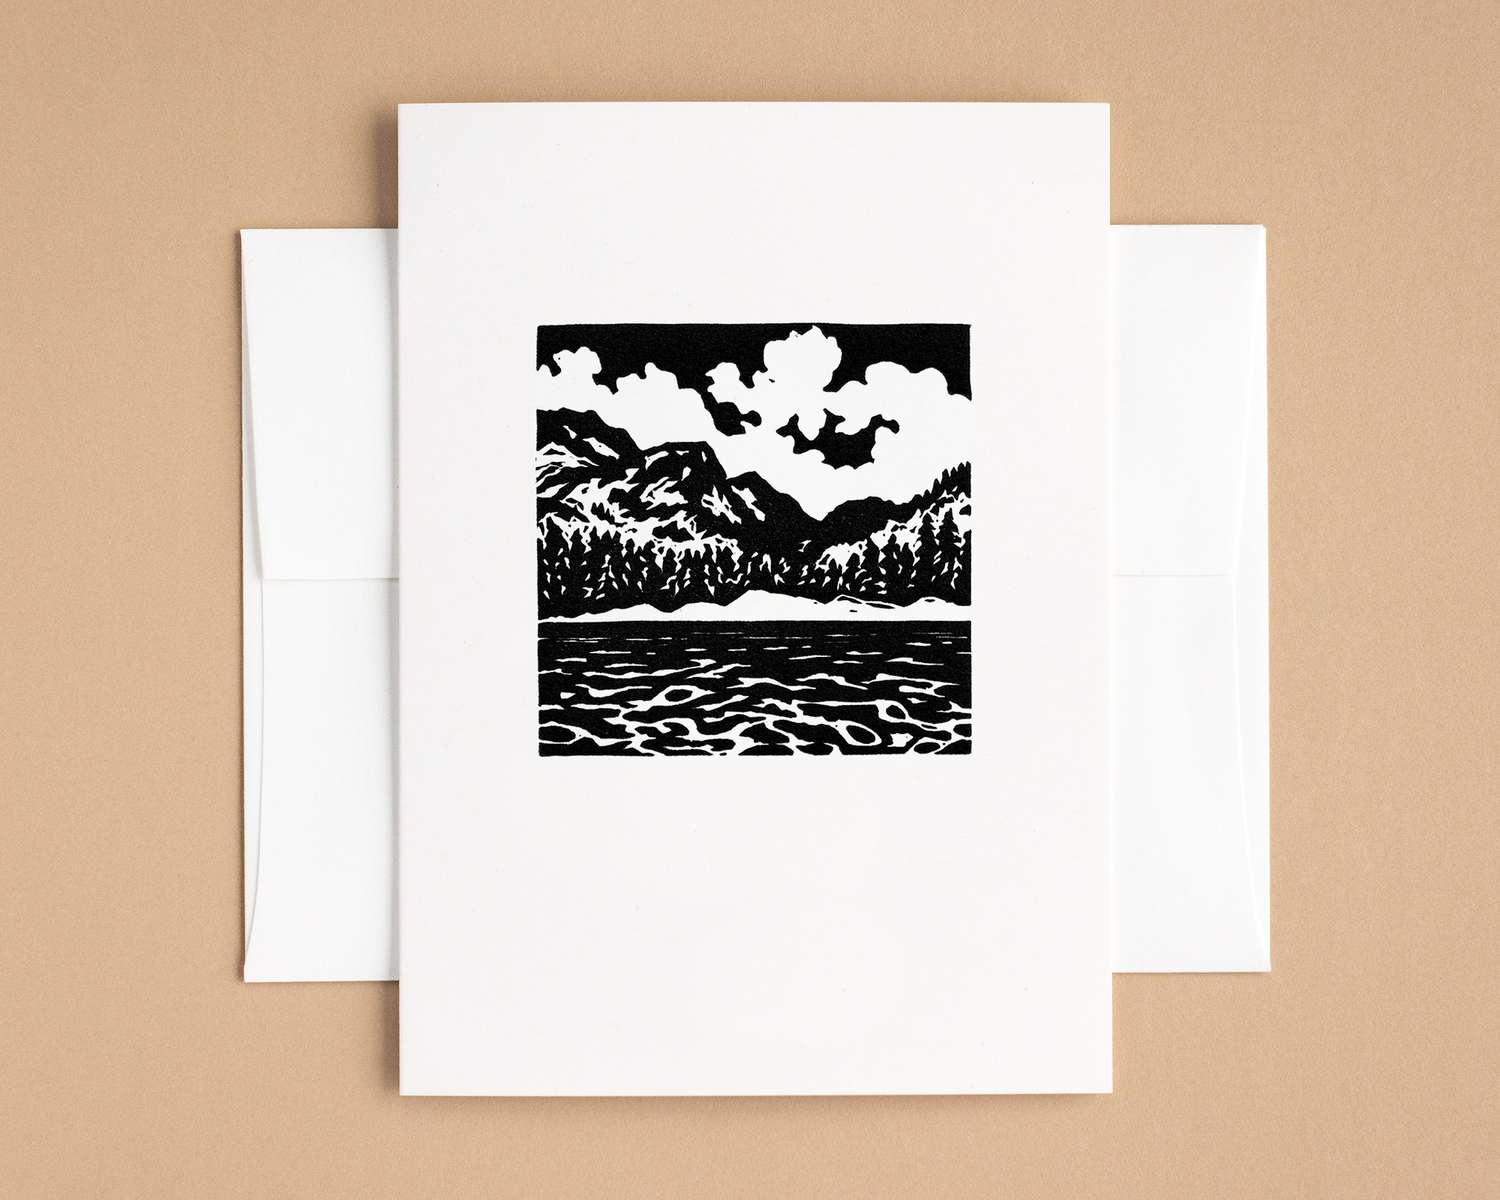 A vertical white card with a black and white depiction of a mountain lake. The card sits on top of a white envelope, which lies on top of a brown backdrop.